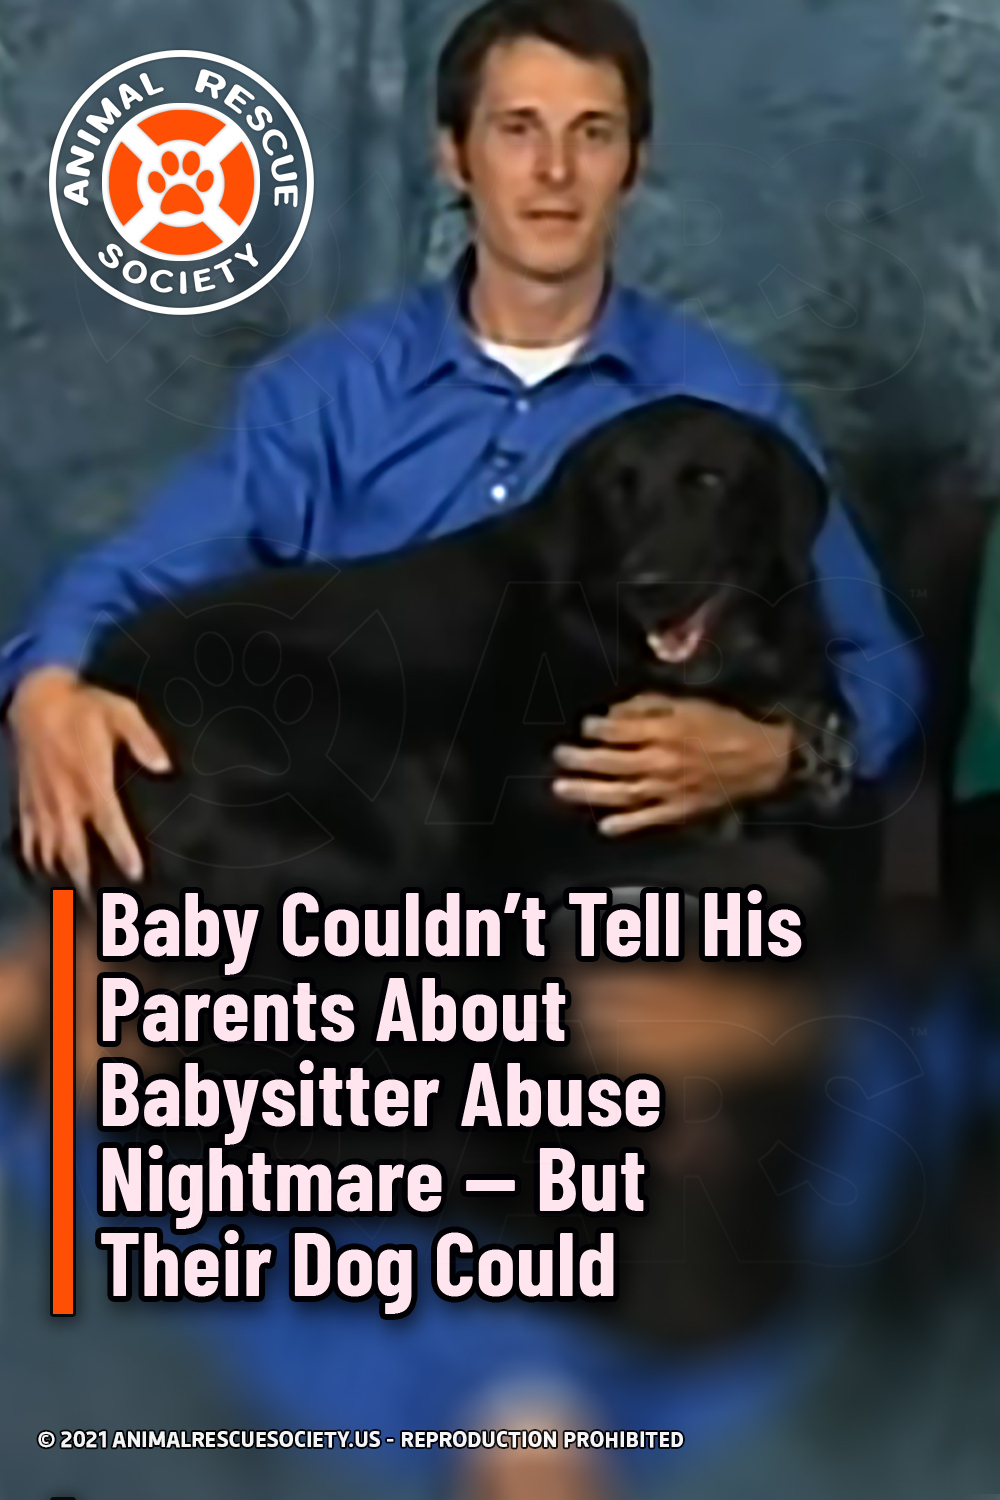 Baby Couldn’t Tell His Parents About Babysitter Abuse Nightmare — But Their Dog Could